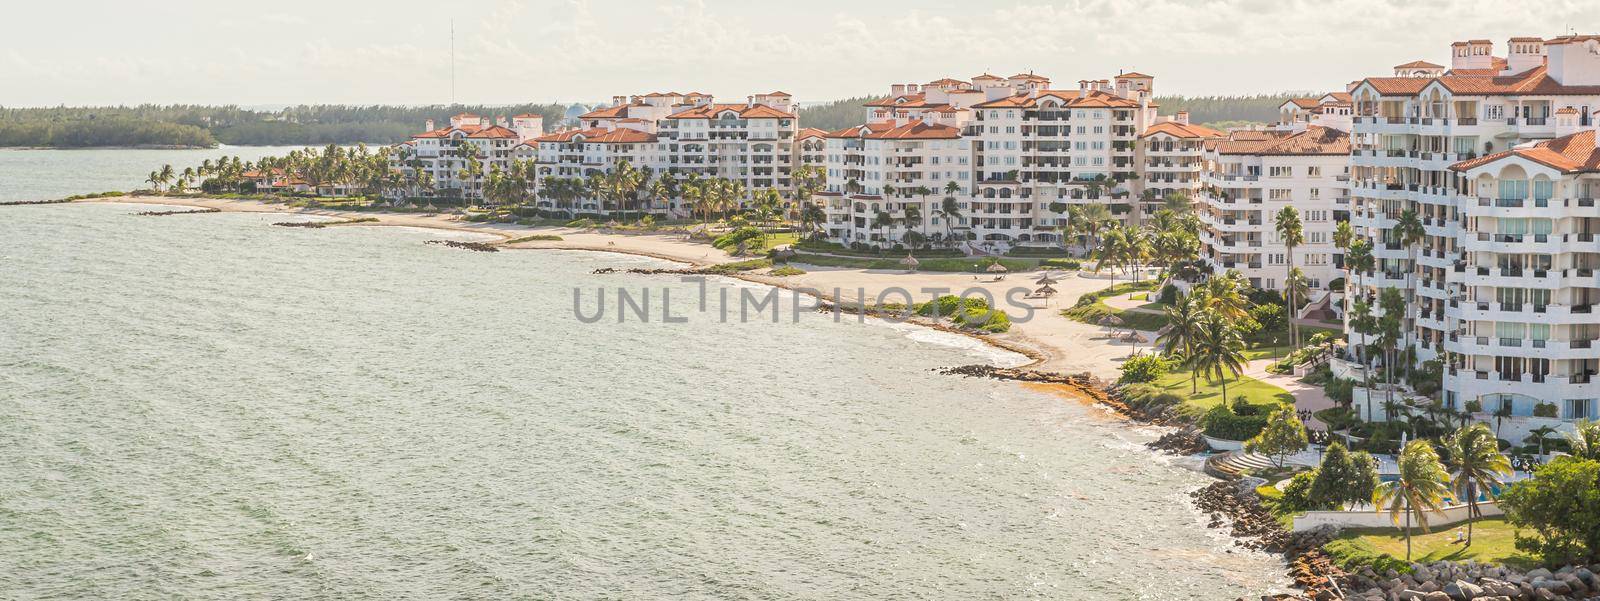 MIAMI, USA - SEPTEMBER 06, 2014: Apartments in Fisher Island on September 06, 2014 in Miami.